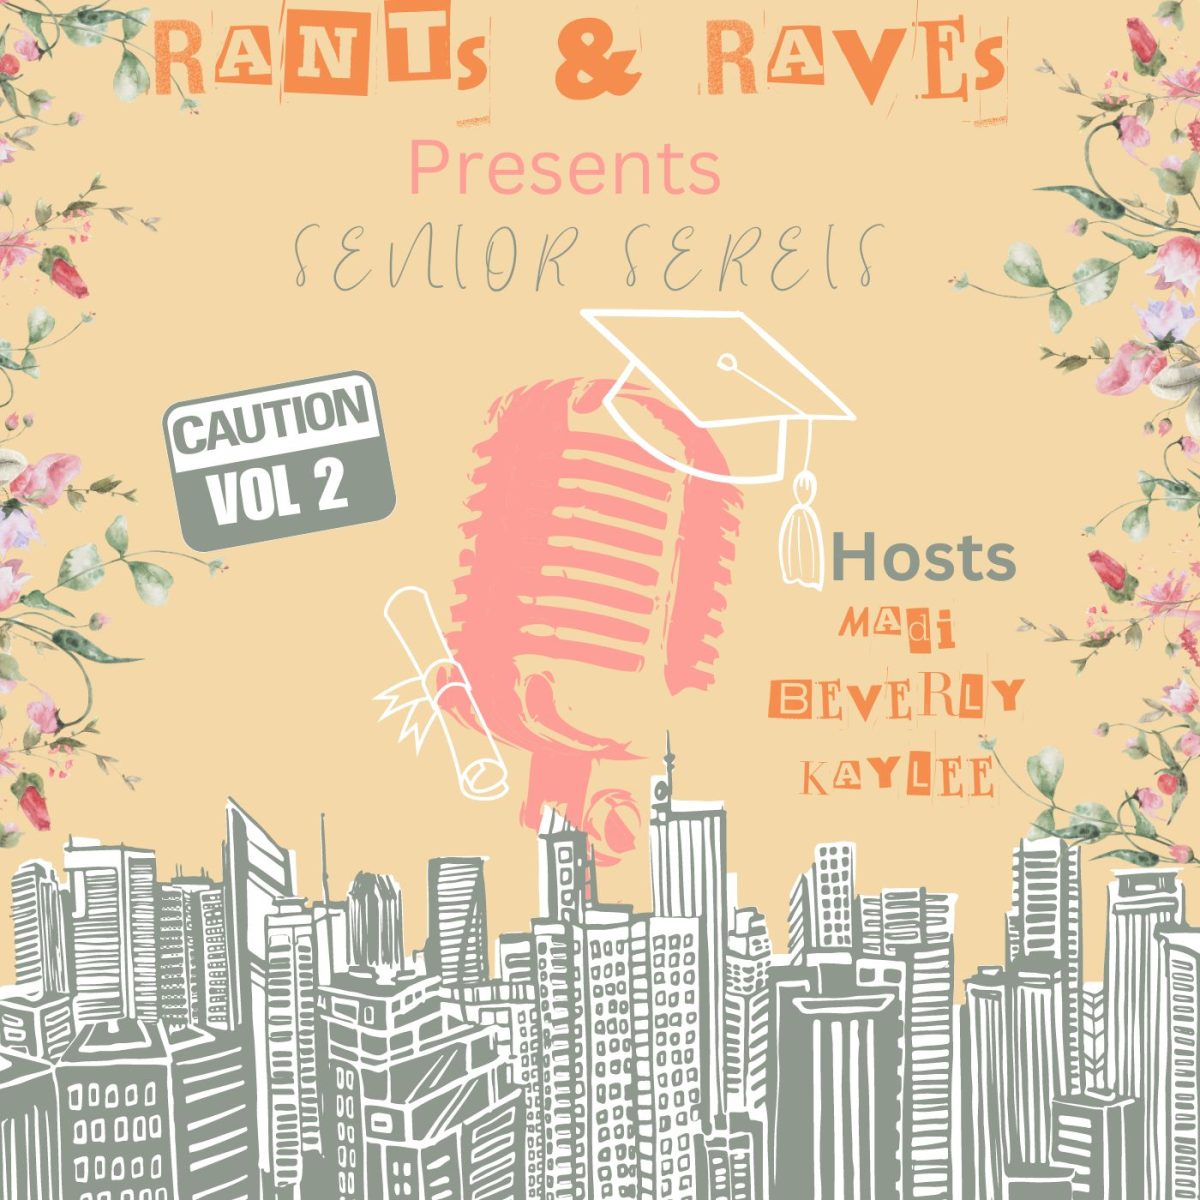 Shes+back%21+Rants+%26+Raves+presents%3A+Senior+series+with+Mo